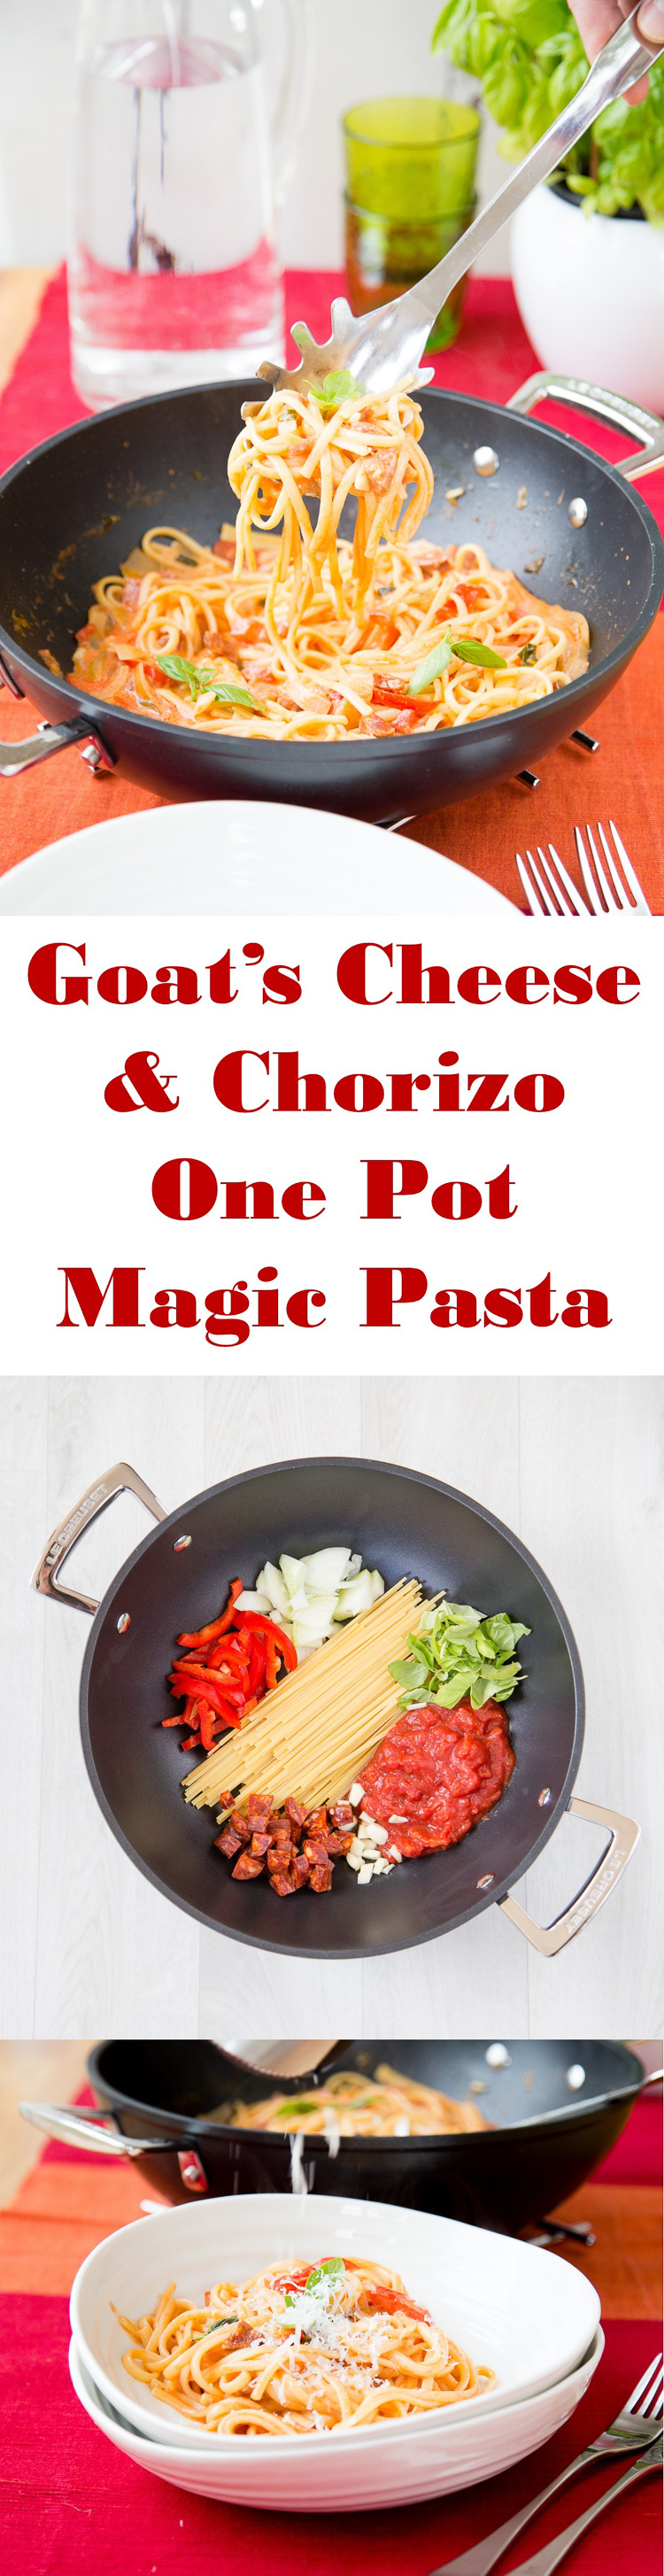 The one pot magic method is only way to cook pasta! An easy recipe for a creamy chorizo & goat’s cheese pasta everything cooks in one single pot and is ready in 20 minutes. 